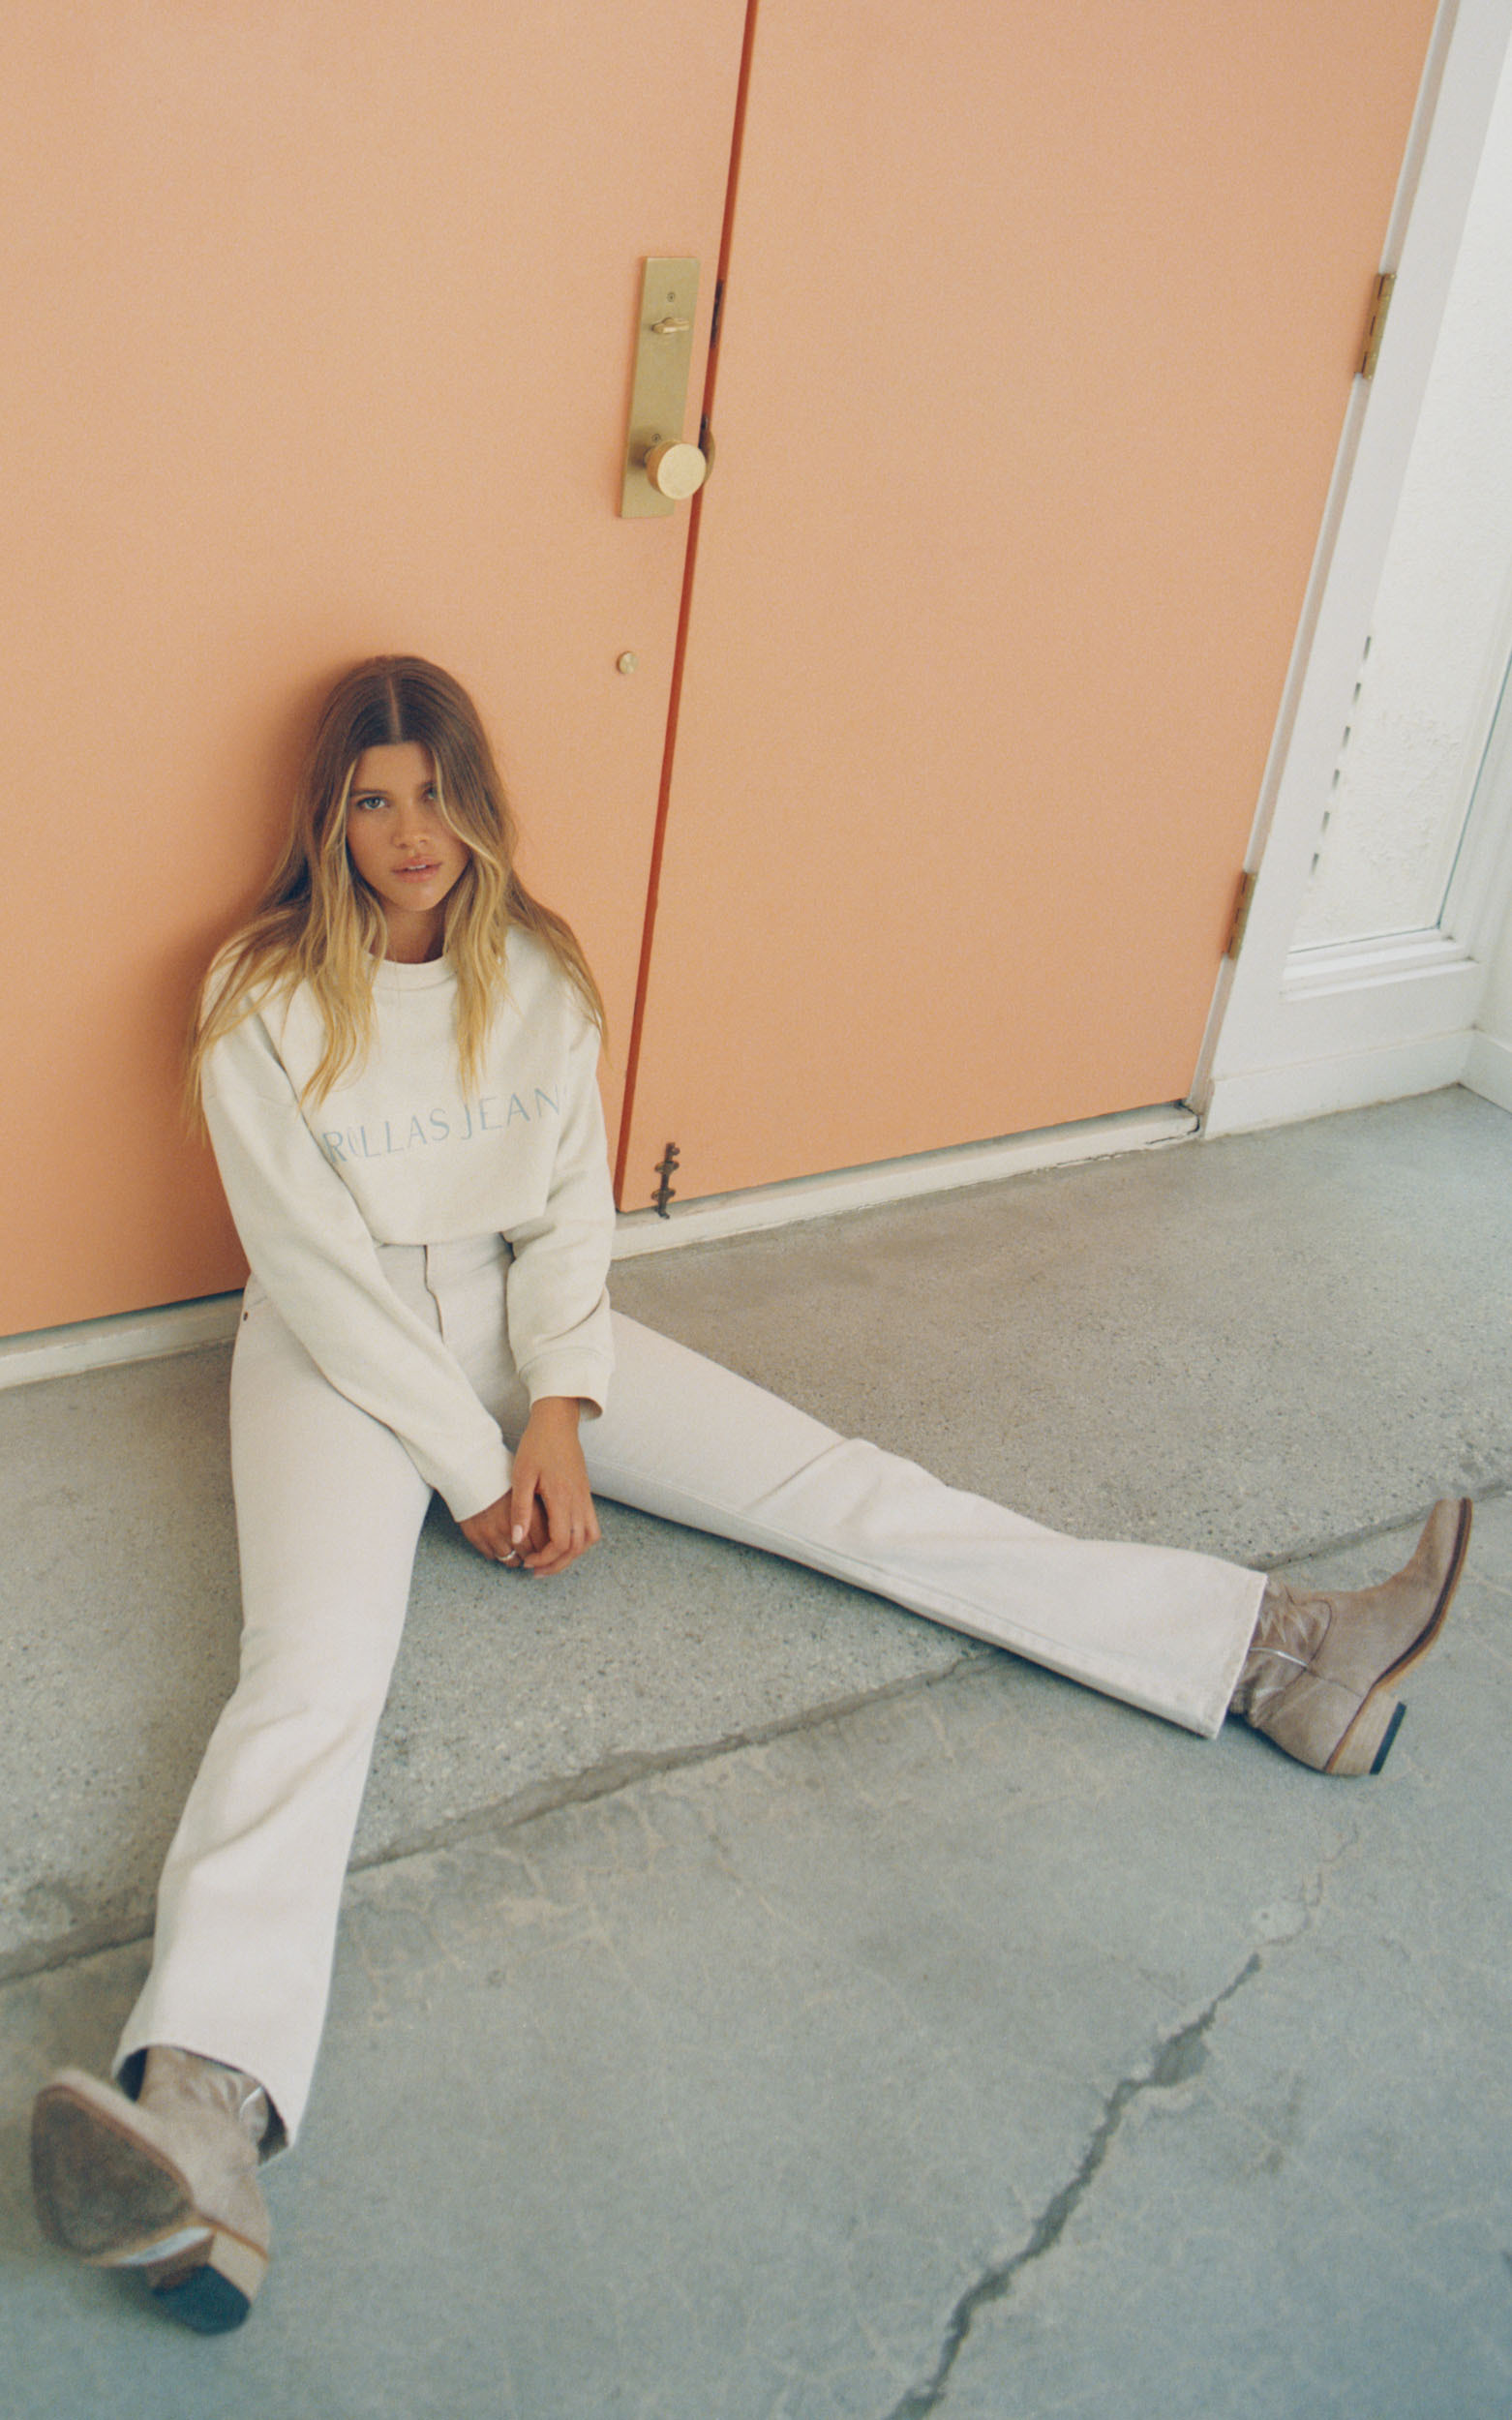 Rolla's x Sofia Richie - Editorial Slouch Sweater in Salt - 06, WHT1, hi-res image number null